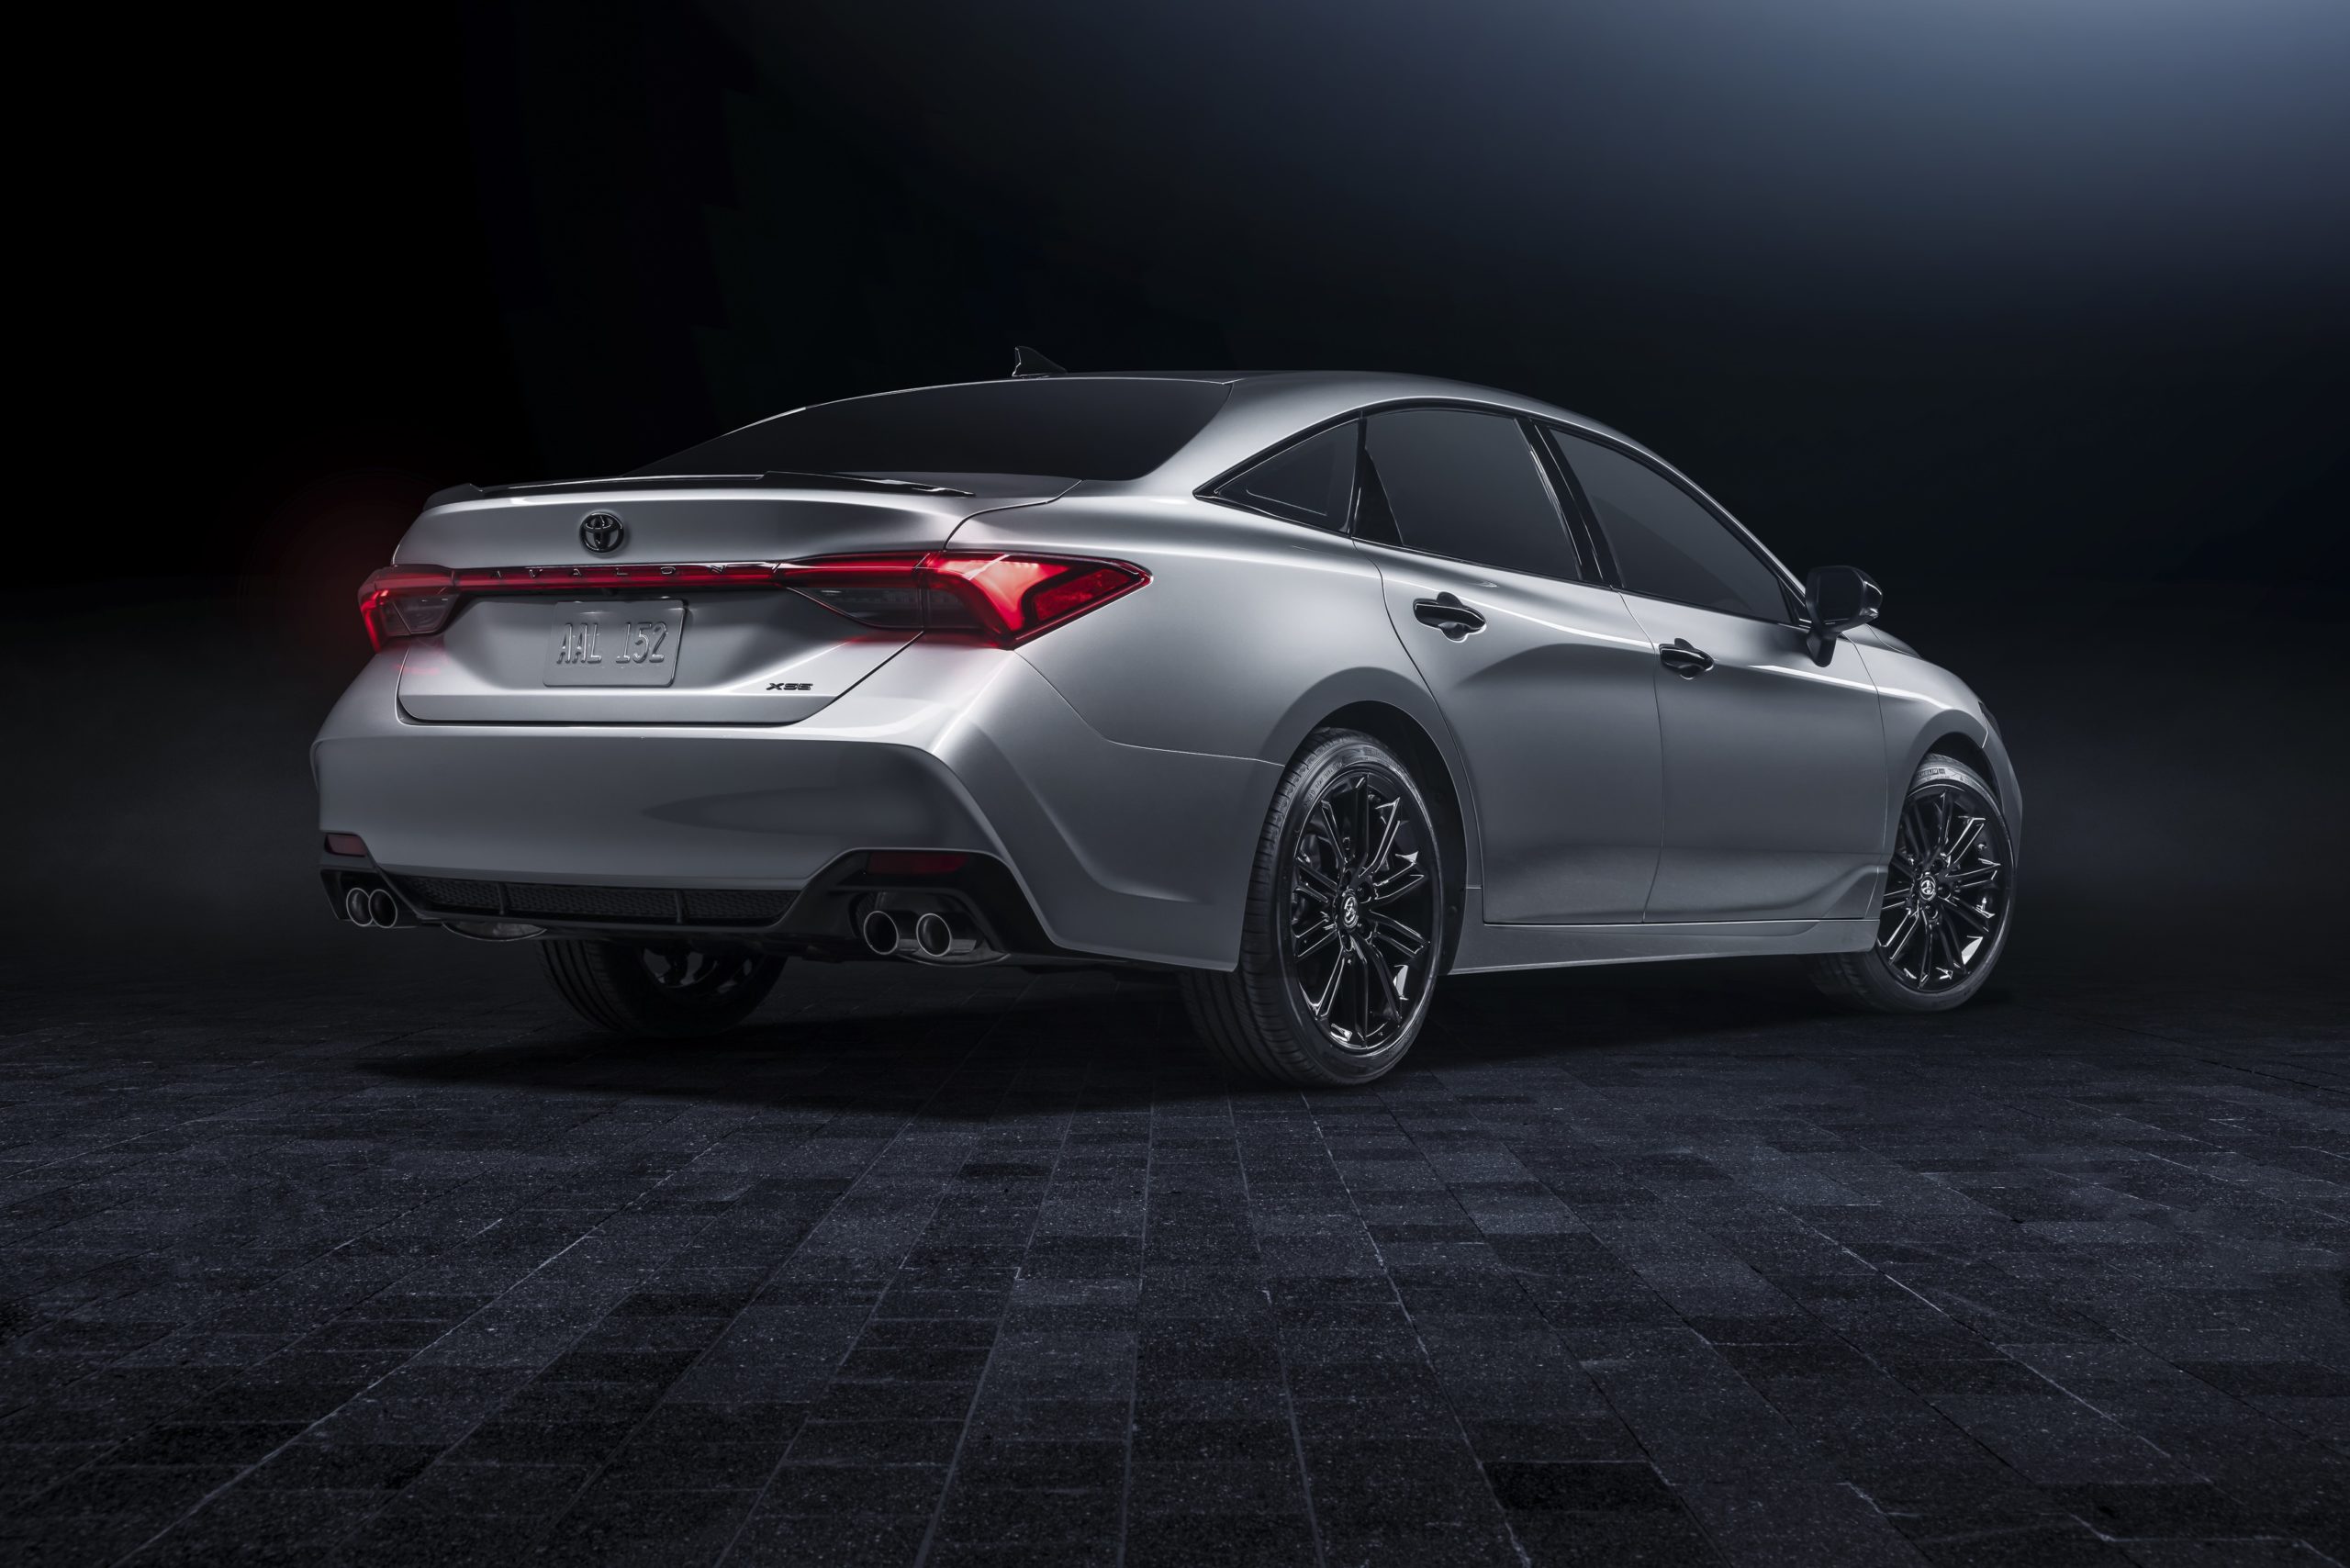 Toyota Adds AWD, ‘Nightshade’ Options for 2021 Avalon | THE SHOP